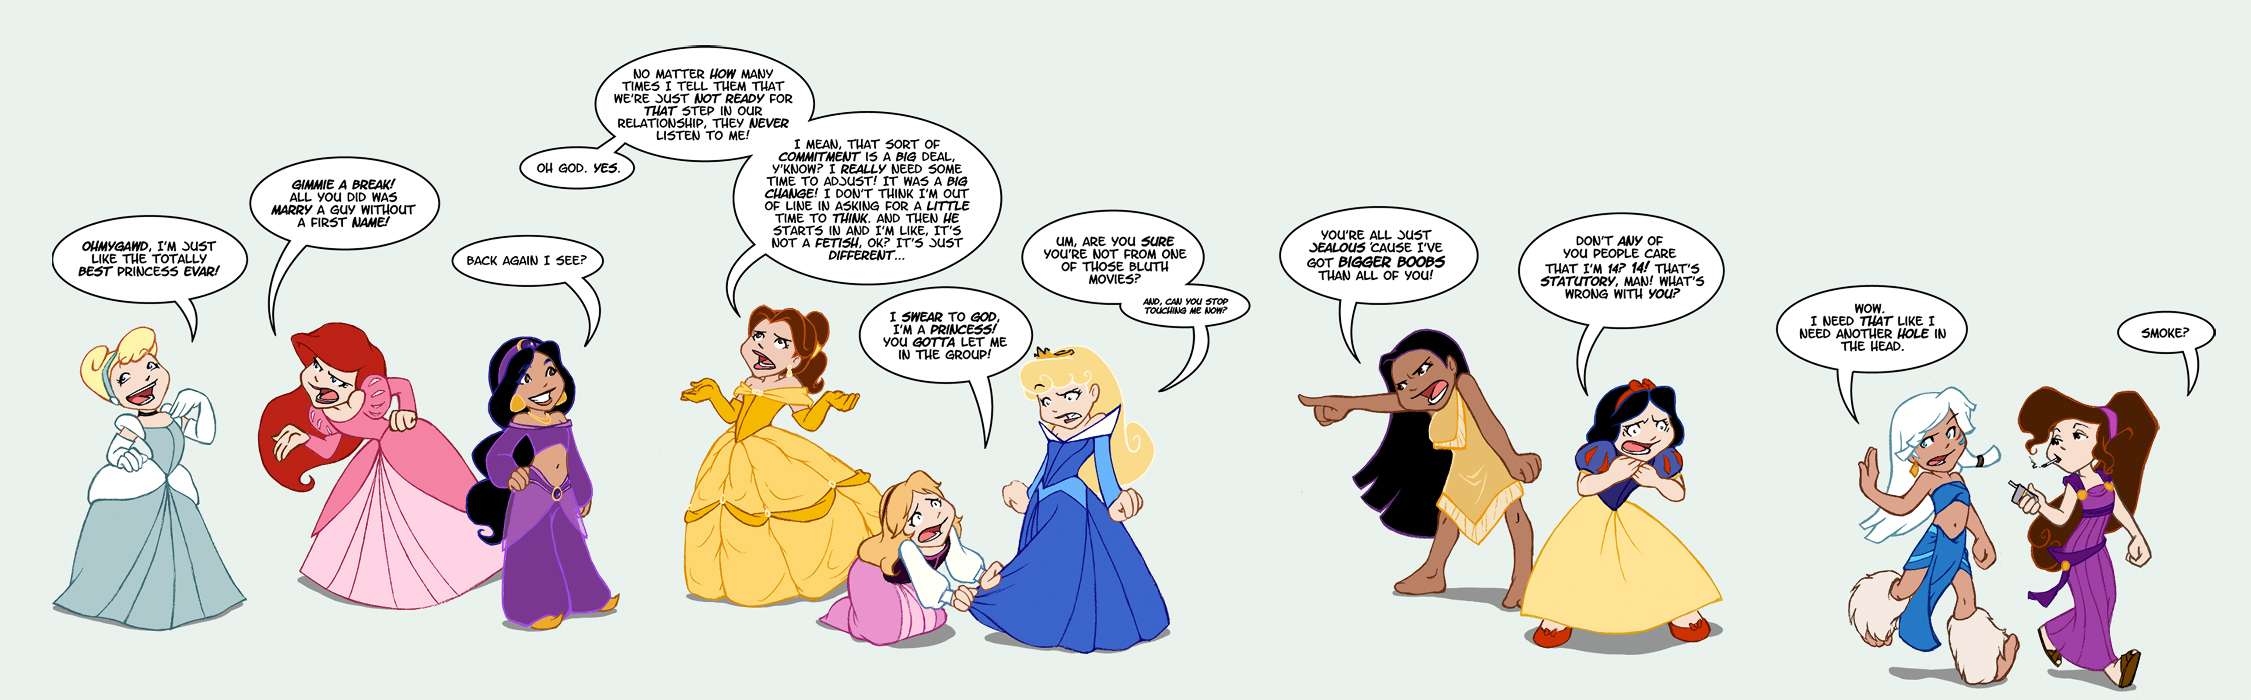 Princesses_have_issues_by_QueenOfTheCute.jpg